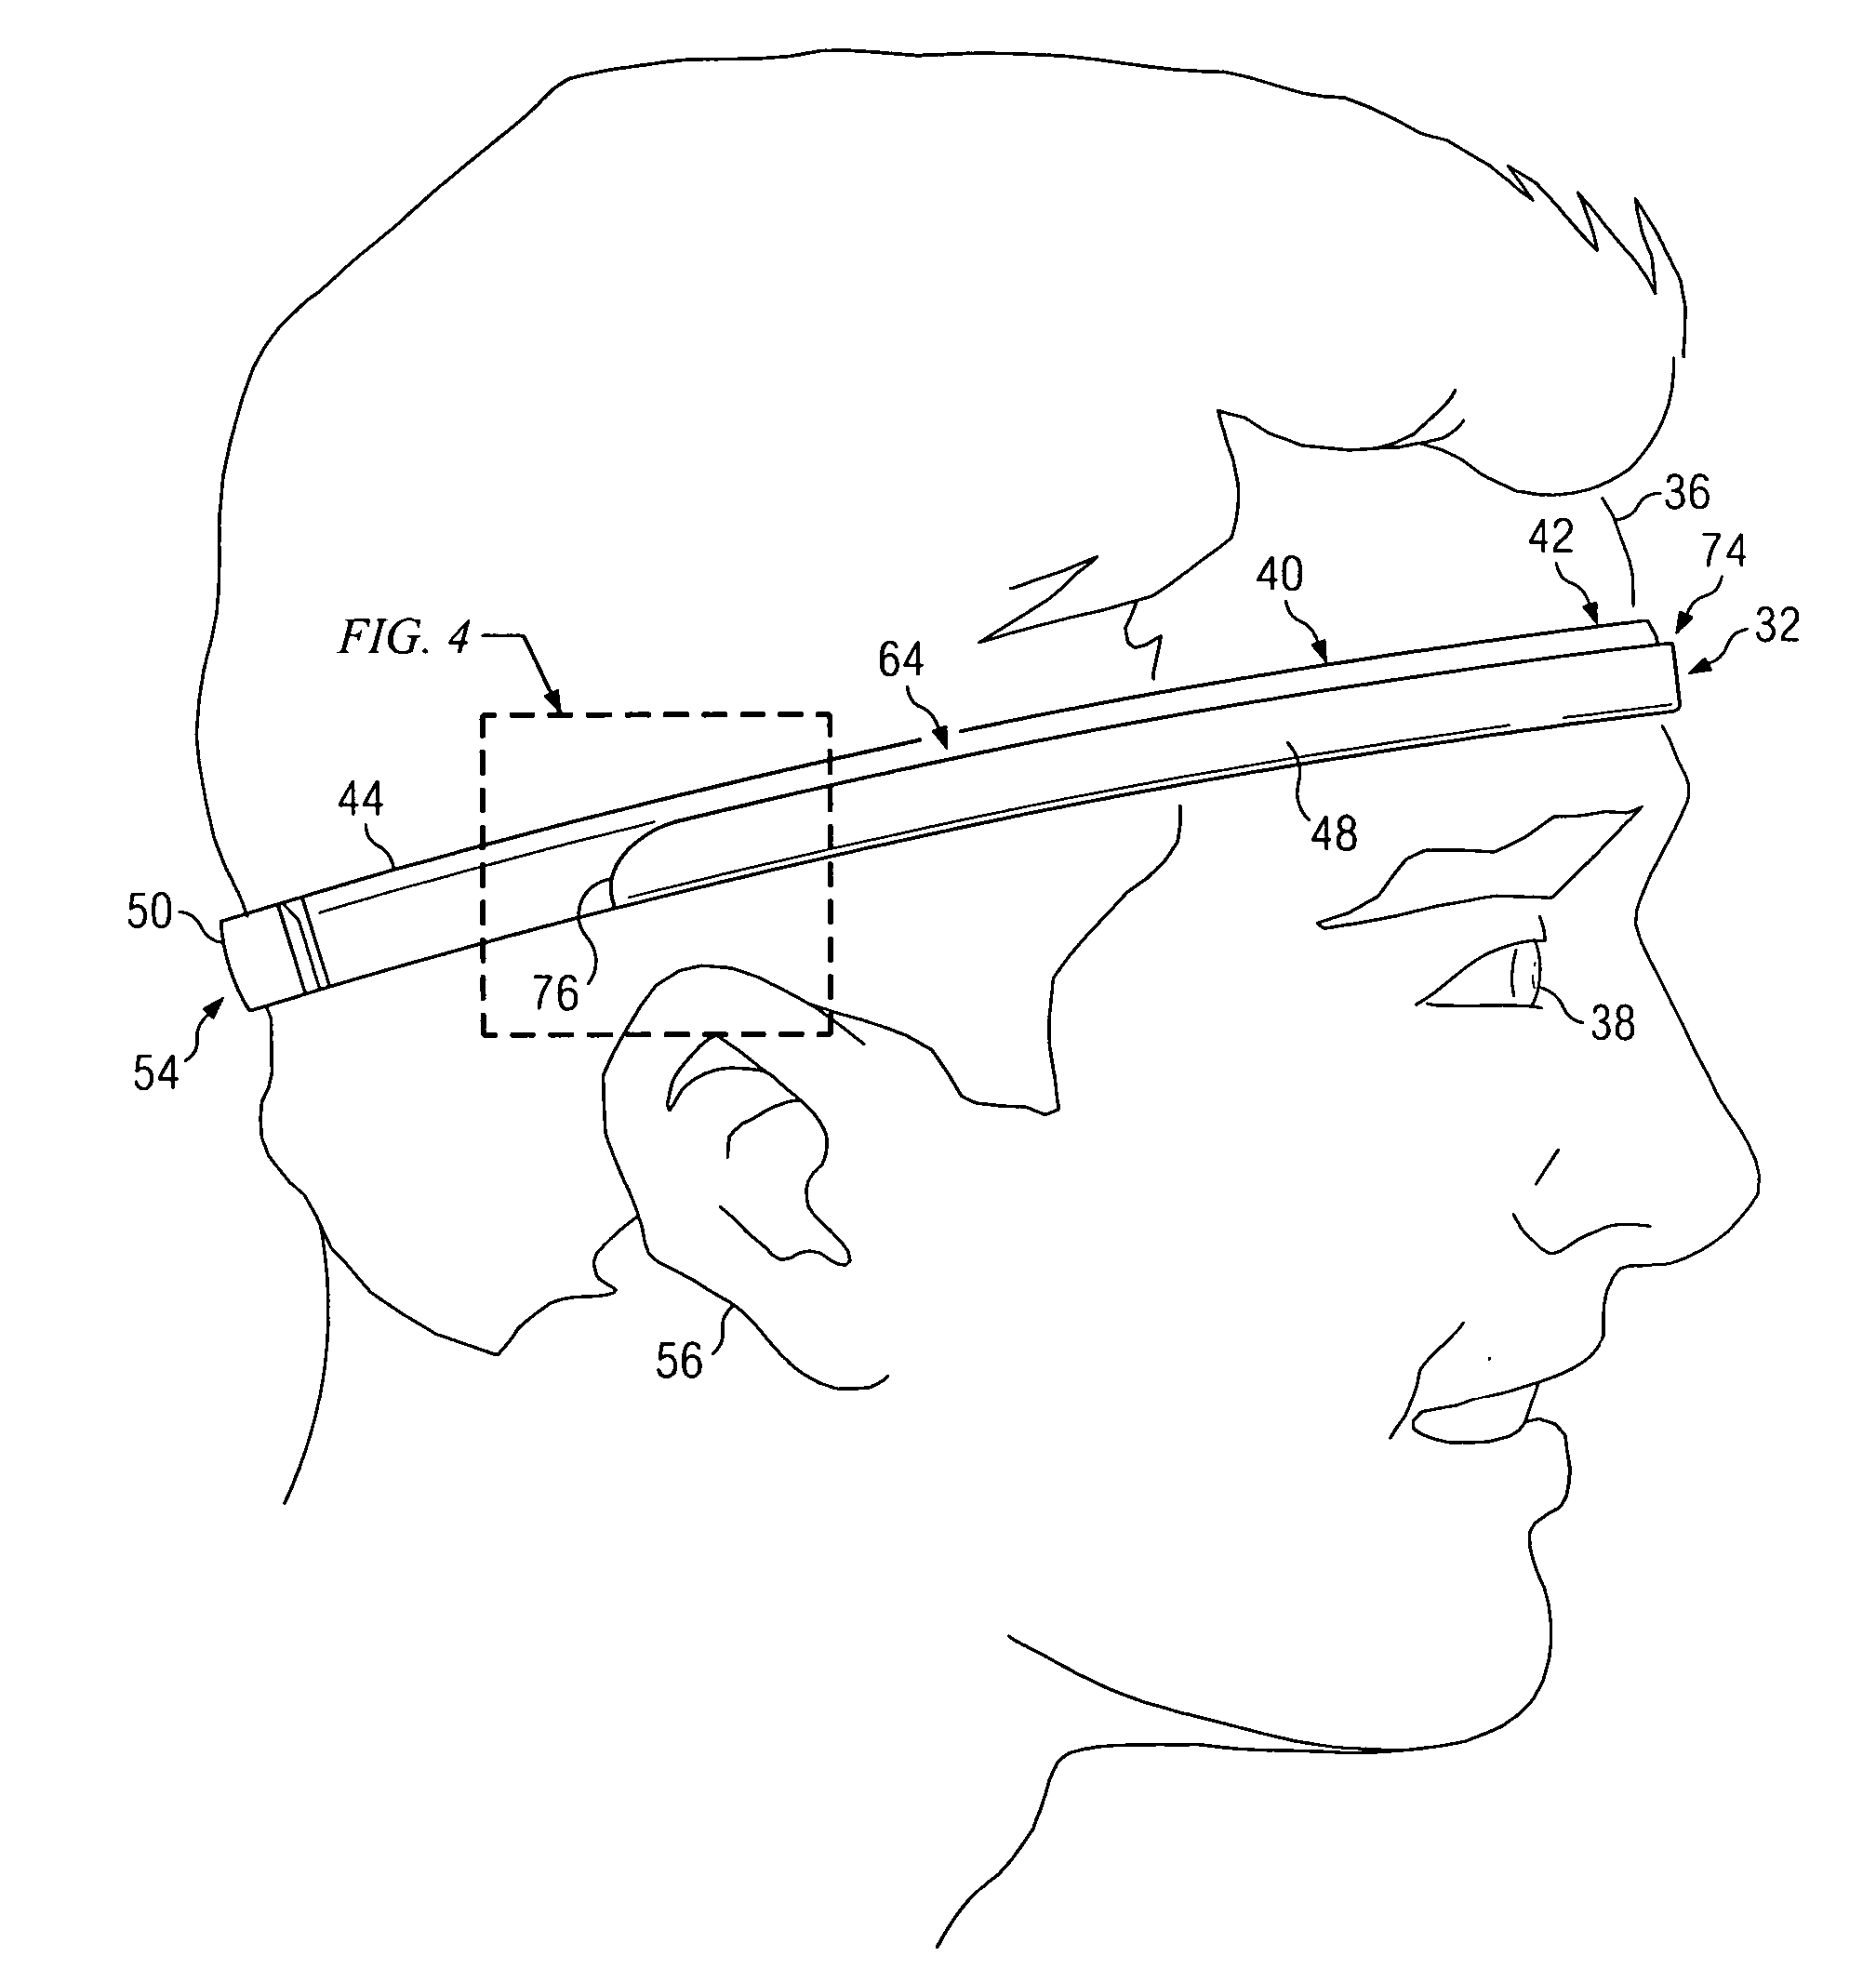 Perspiration redirecting head band device